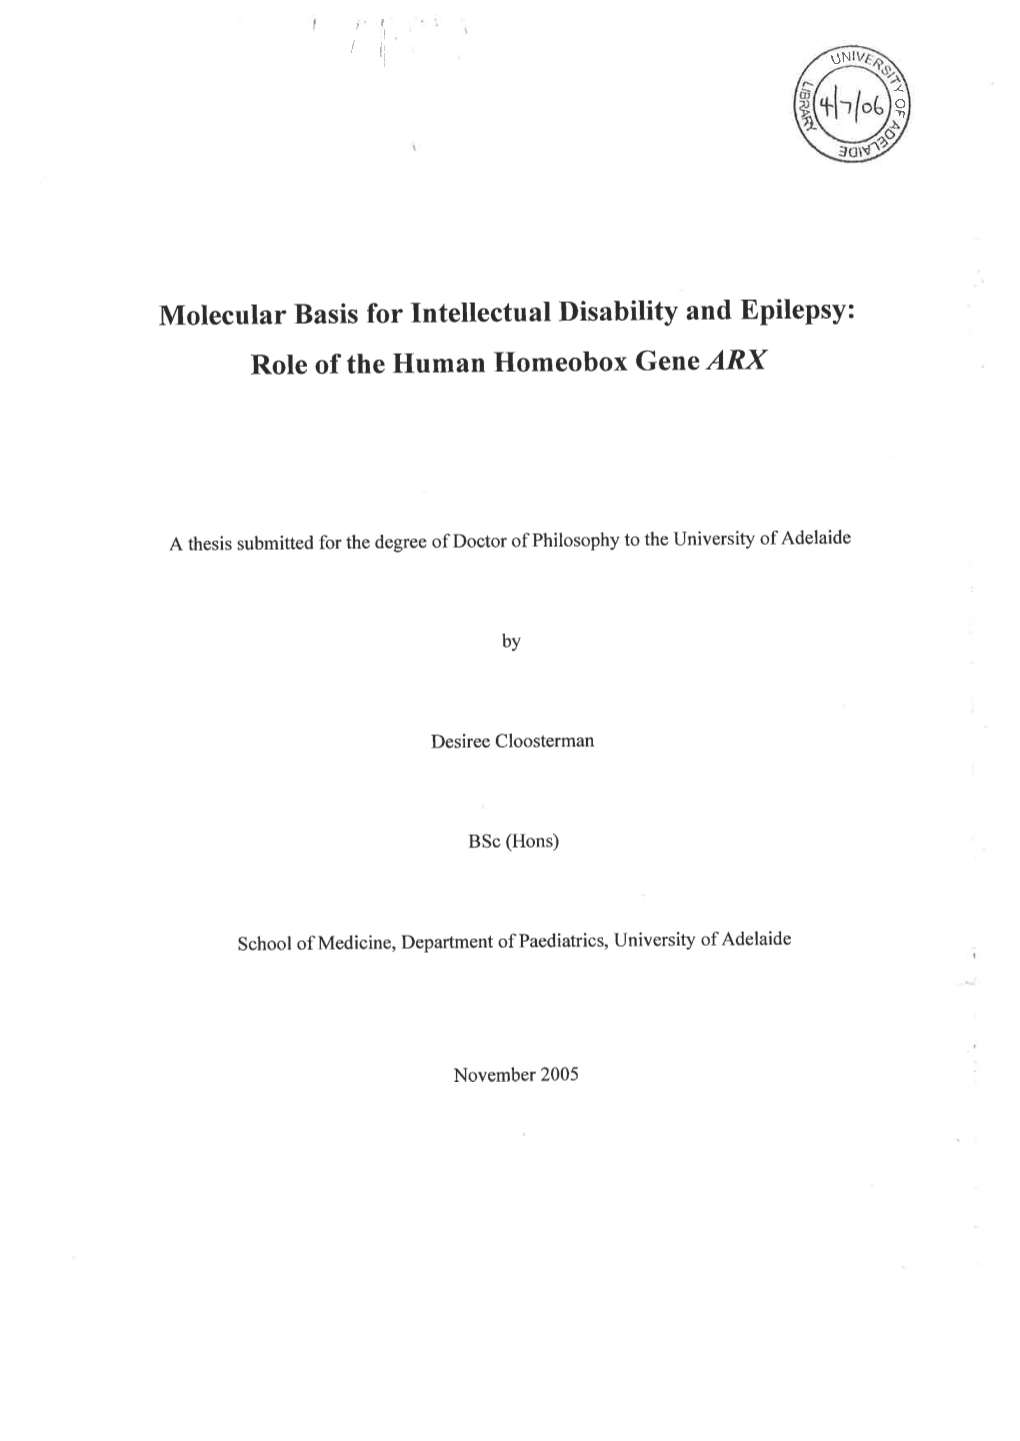 Molecular Basis for Intellectual Disability and Epilepsy: Role of the Human Homeobox Gene ARX